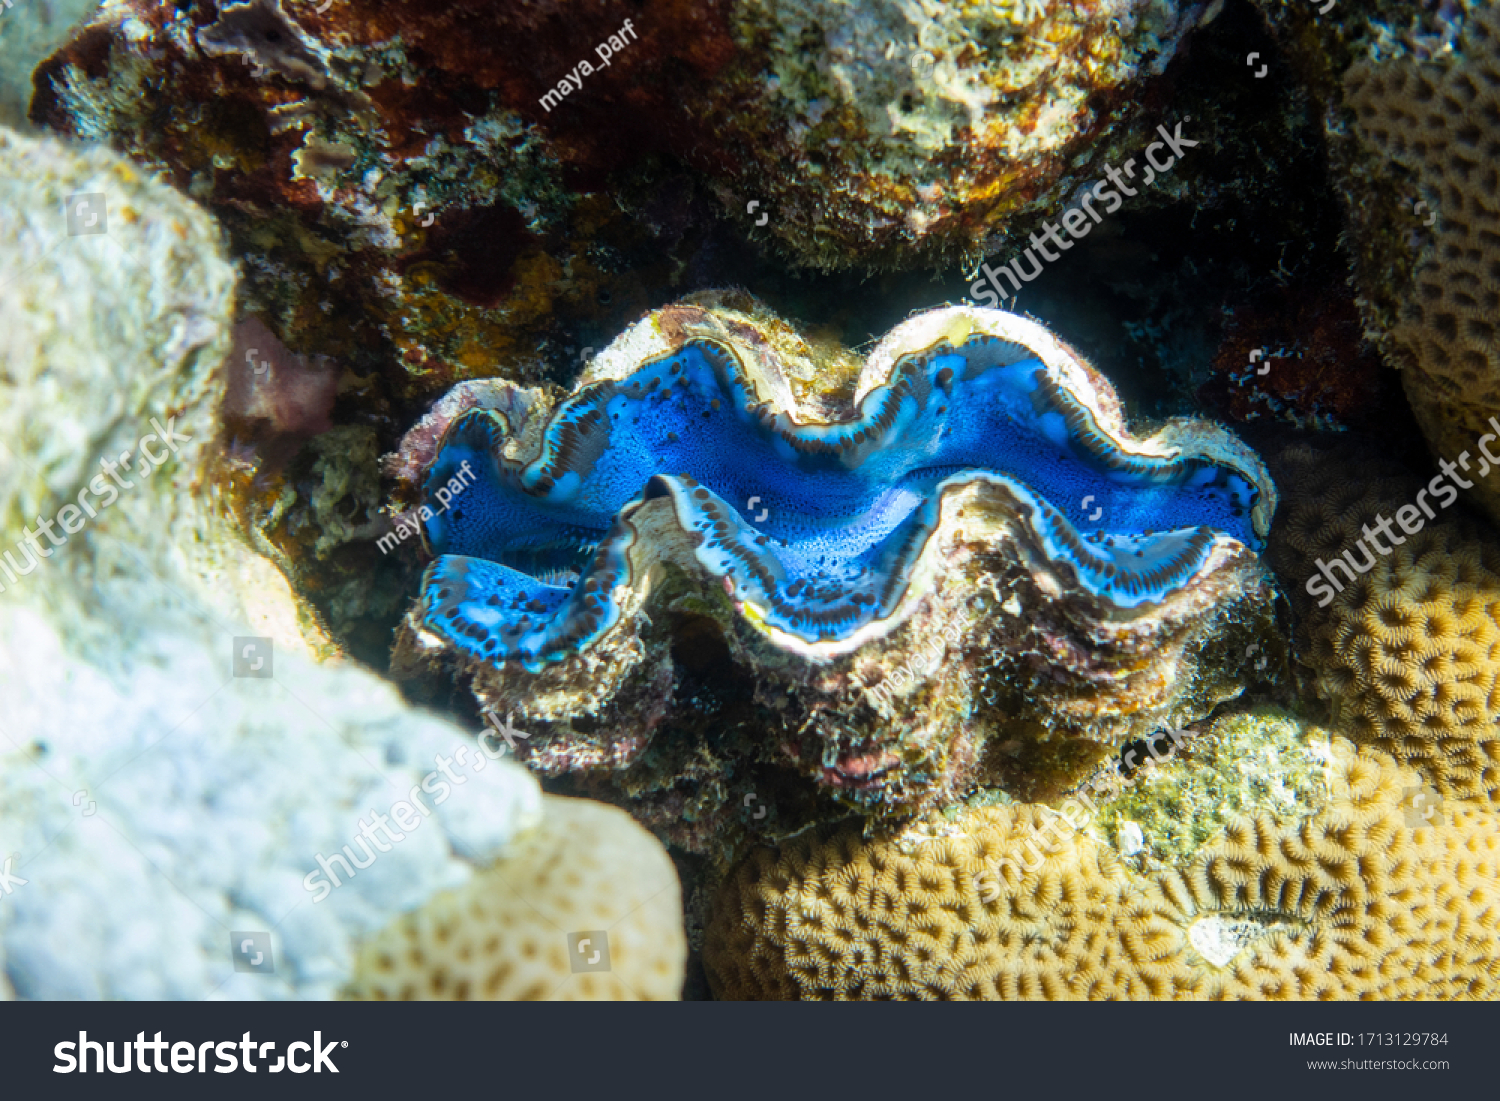 Giant Tridacna, Saltwater Clams In The Coral Reef, Red Sea. Marine Bivalve Blue Mollusks, Large Shells. Amazing Underwater Dangerous Animal. #1713129784